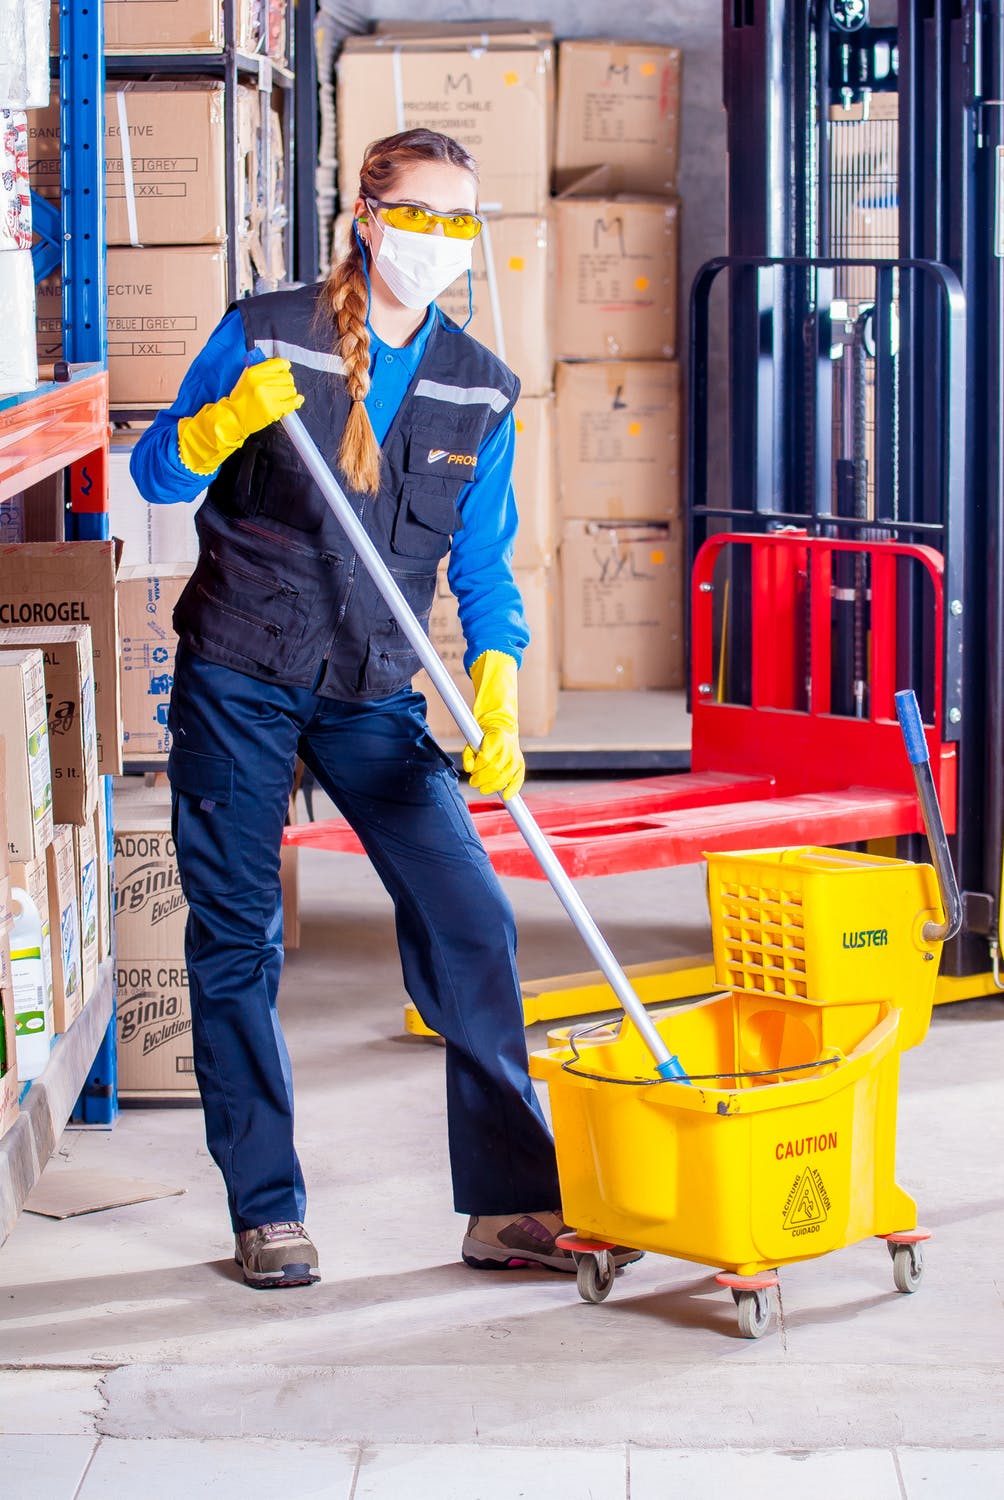 5 questions you must ask the cleaning service before hiring them